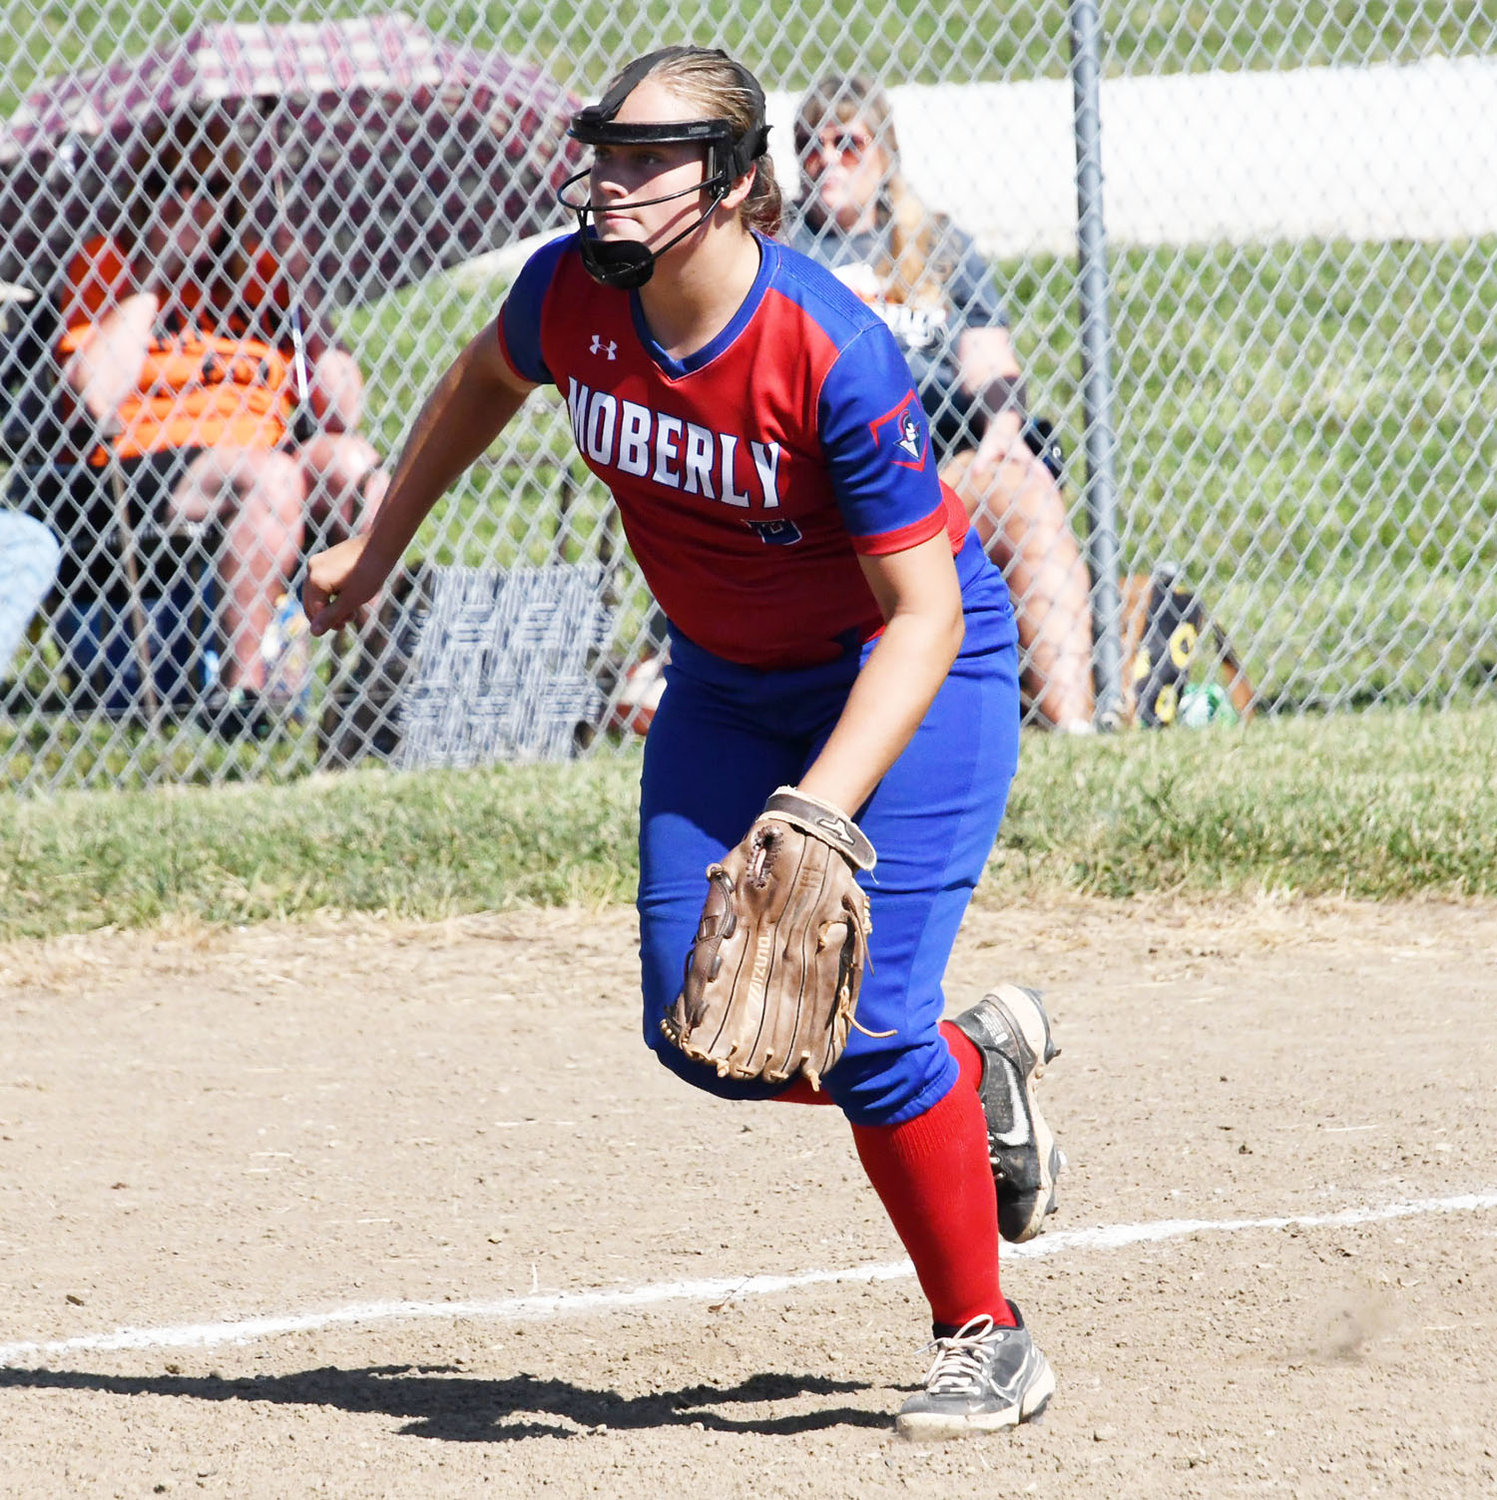 Moberly third baseman Jordan Pasbrig charges toward home plate for a possible Macon bunt during the second inning.